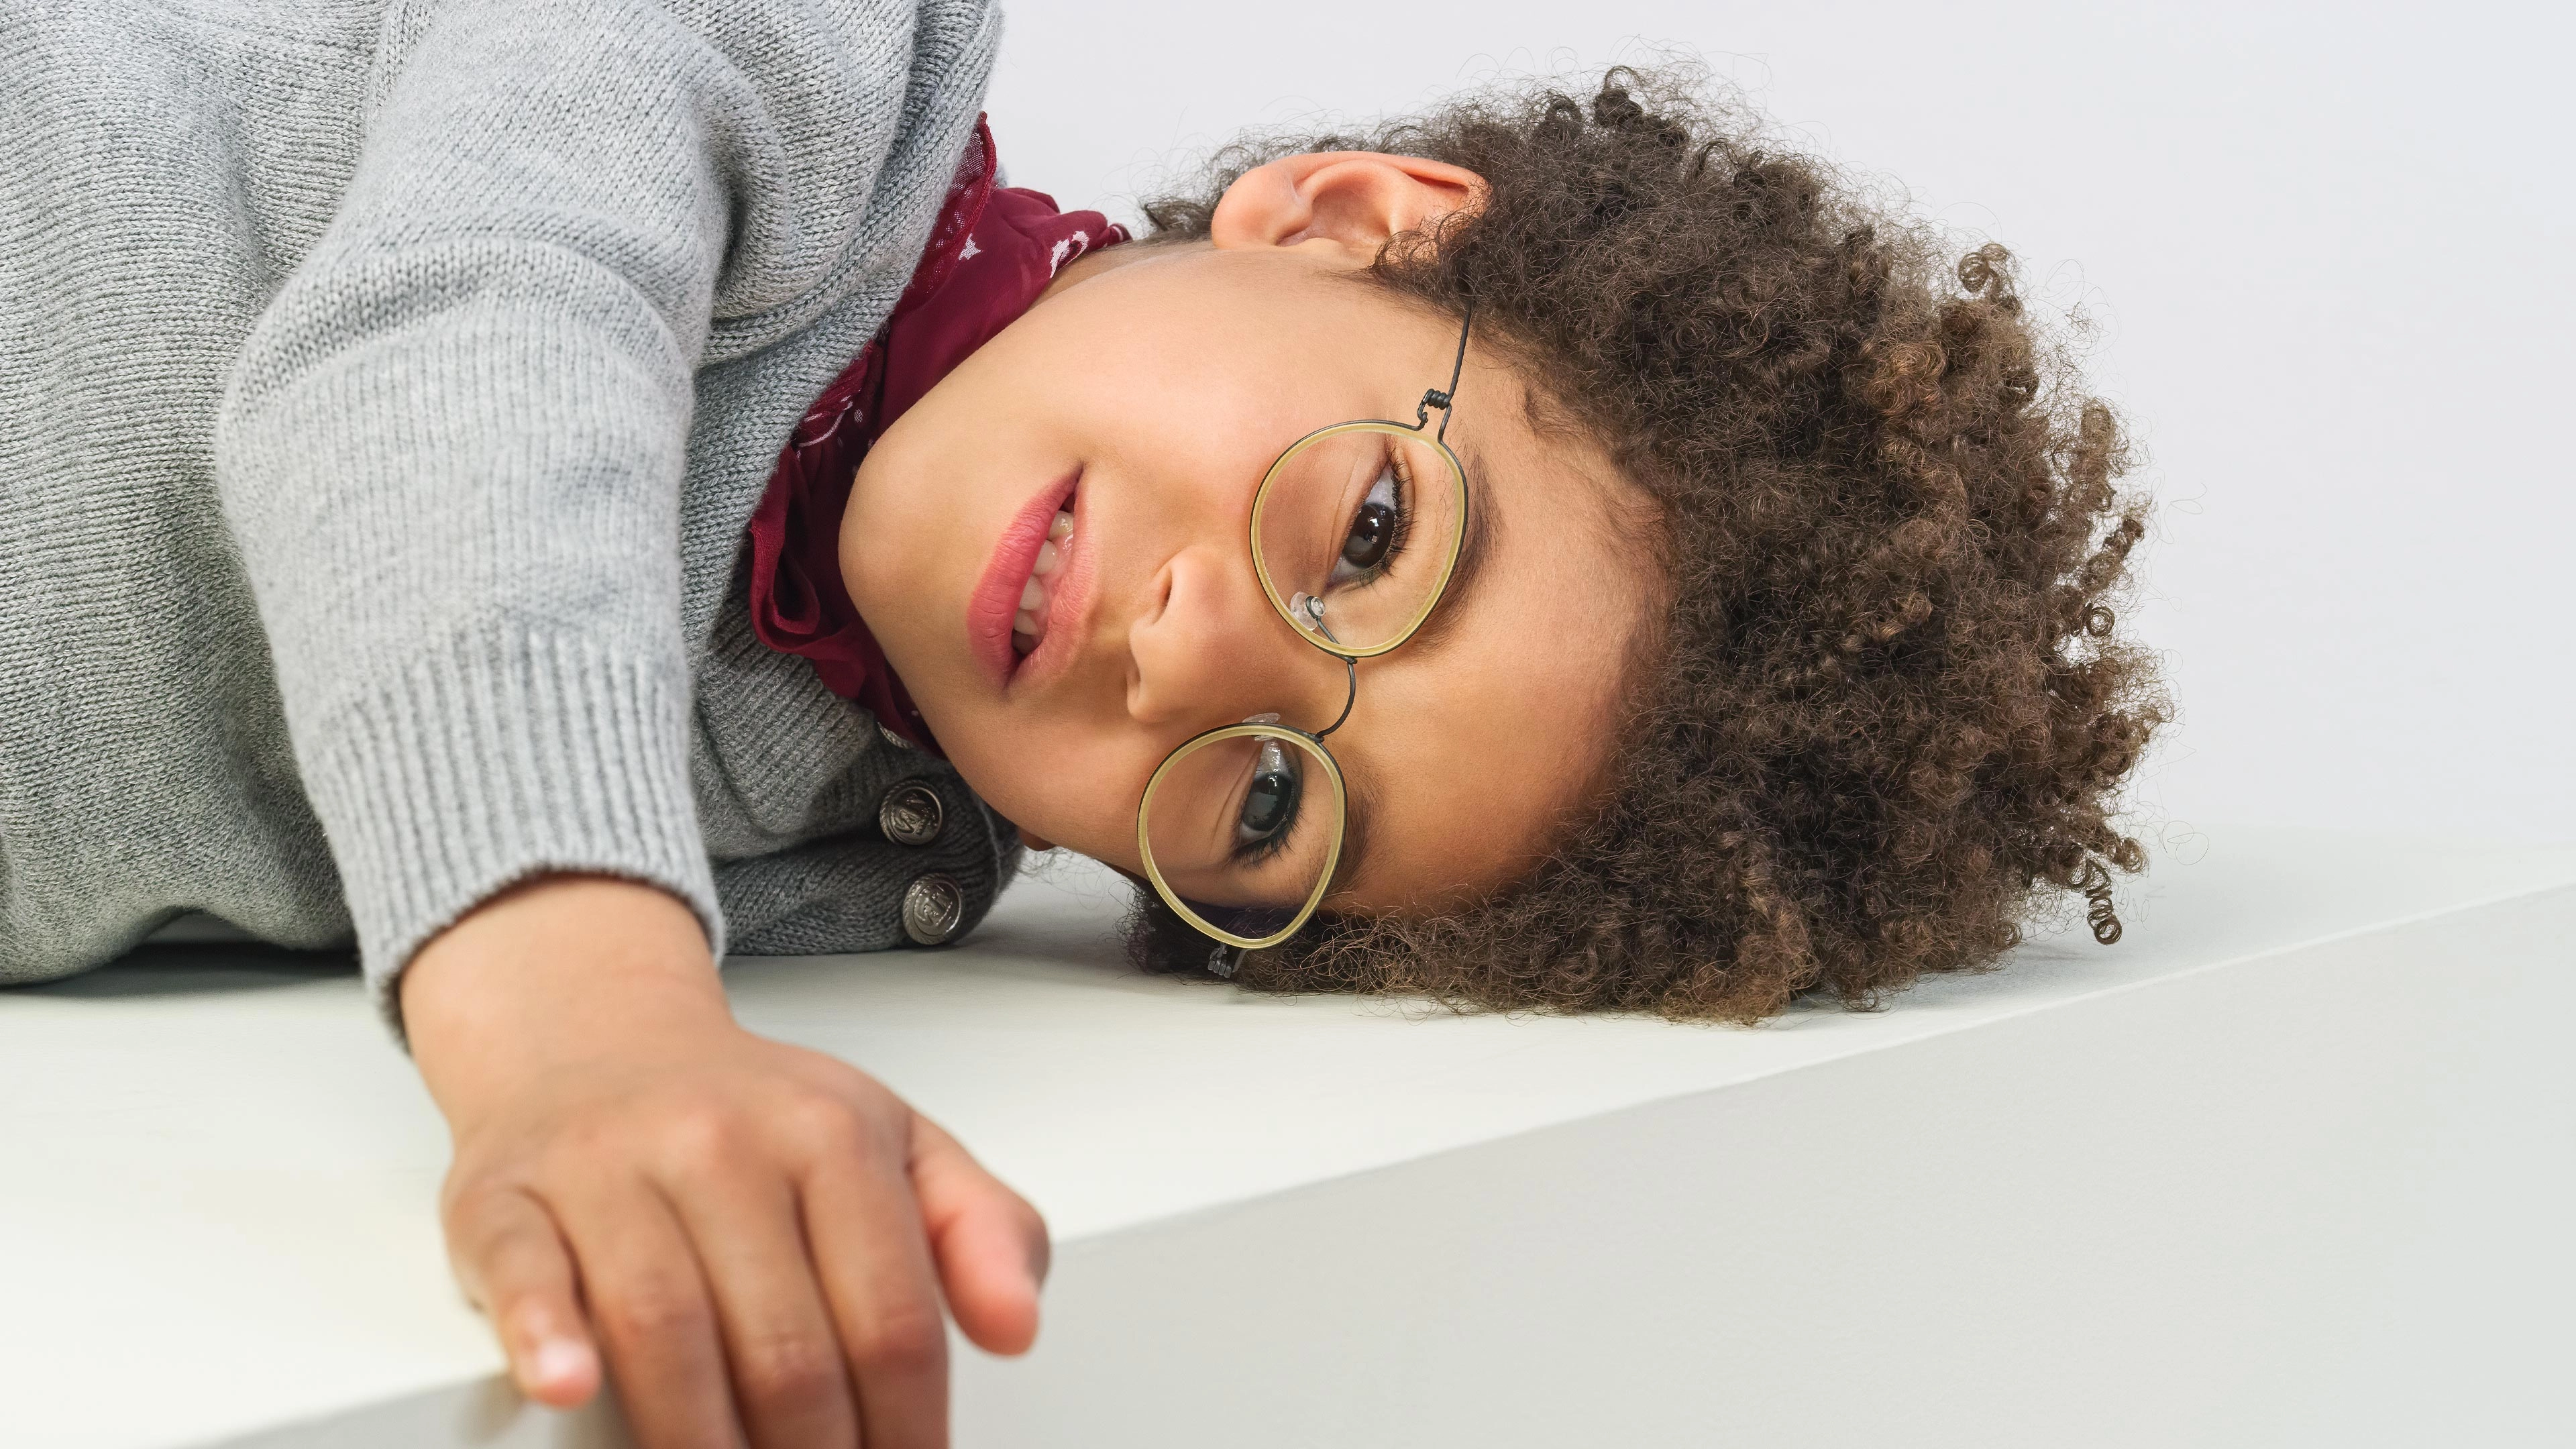 Clear Vision for Little Eyes: The Top Picks for Kids' Eyewear